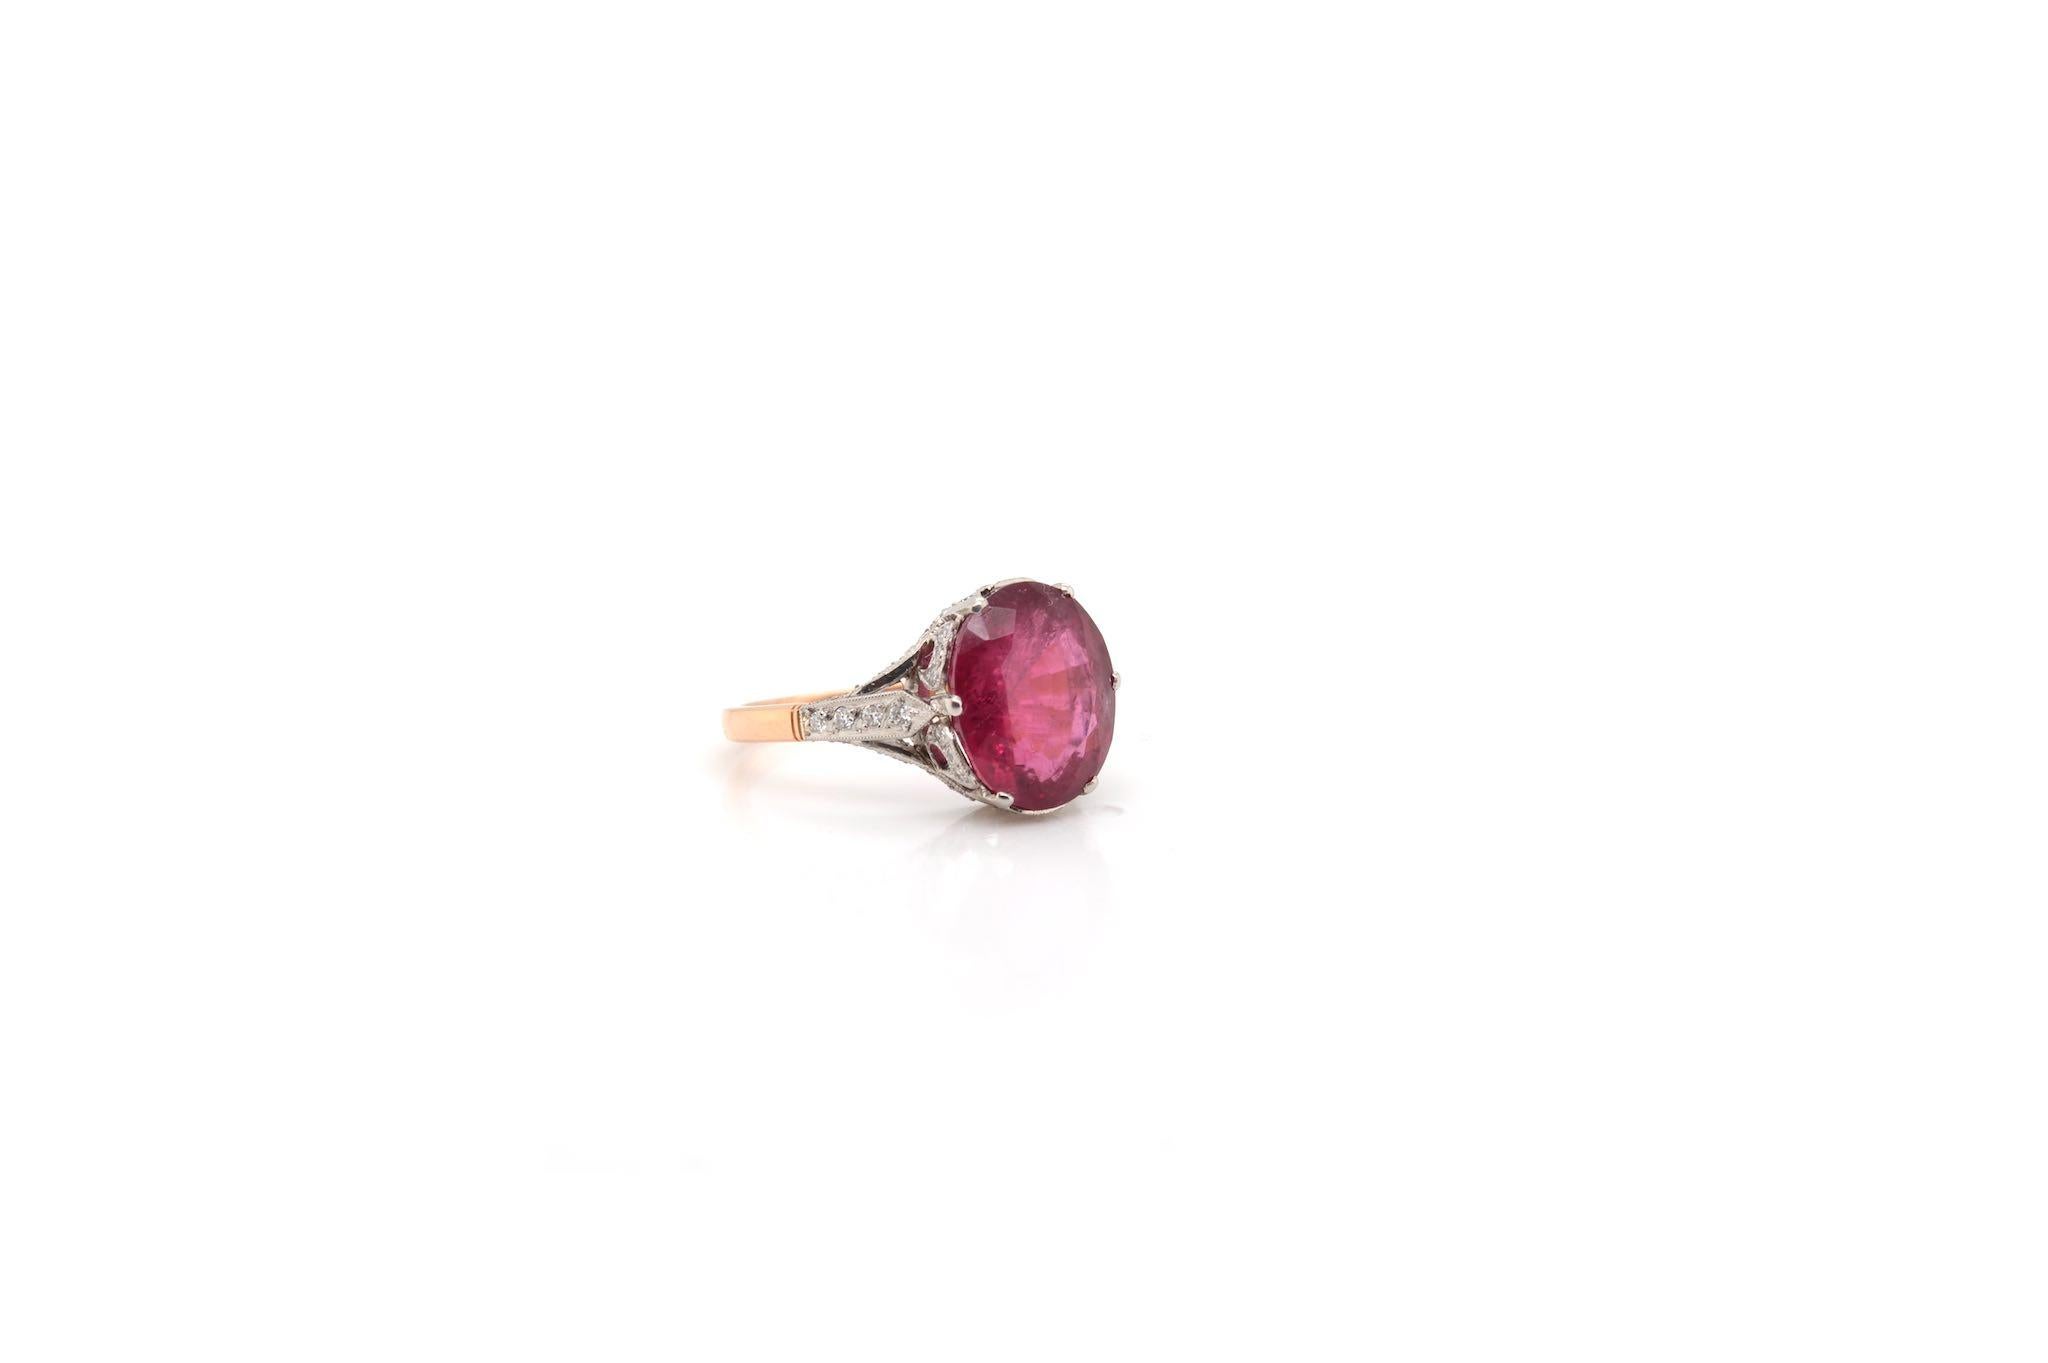 Oval Cut 5.41 carats rubellite and diamonds ring For Sale